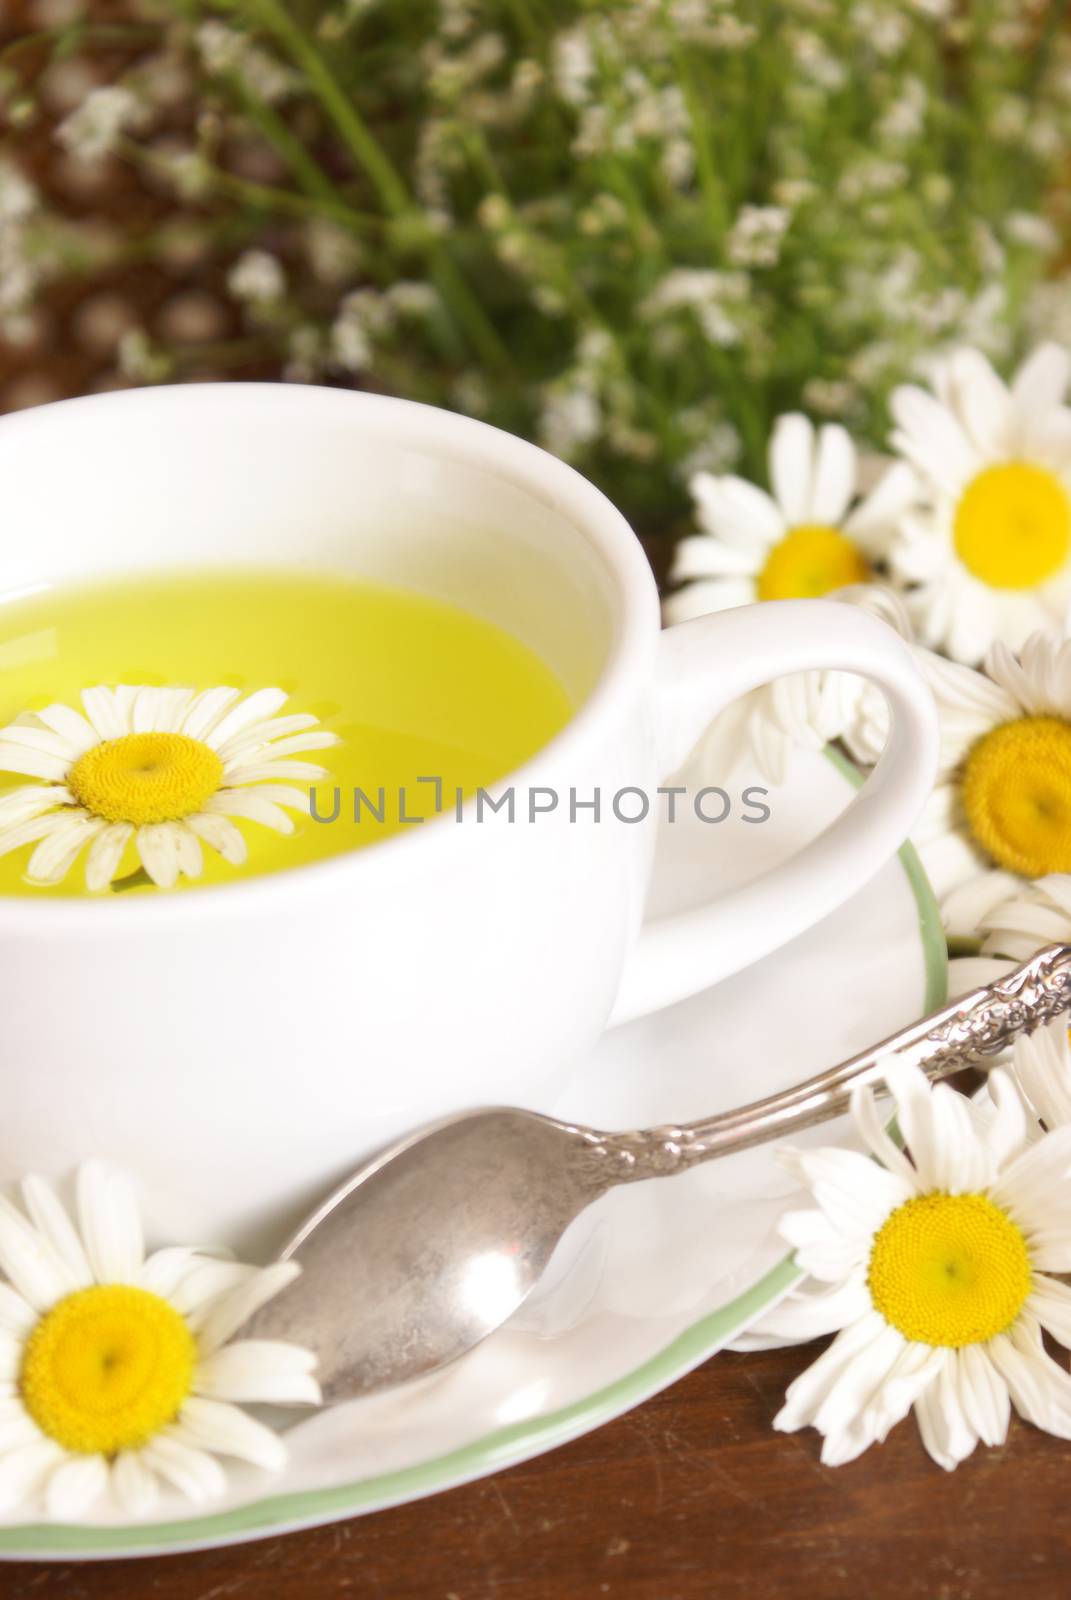 A lovely fresh cup of Chamomile tea with a silver spoon.